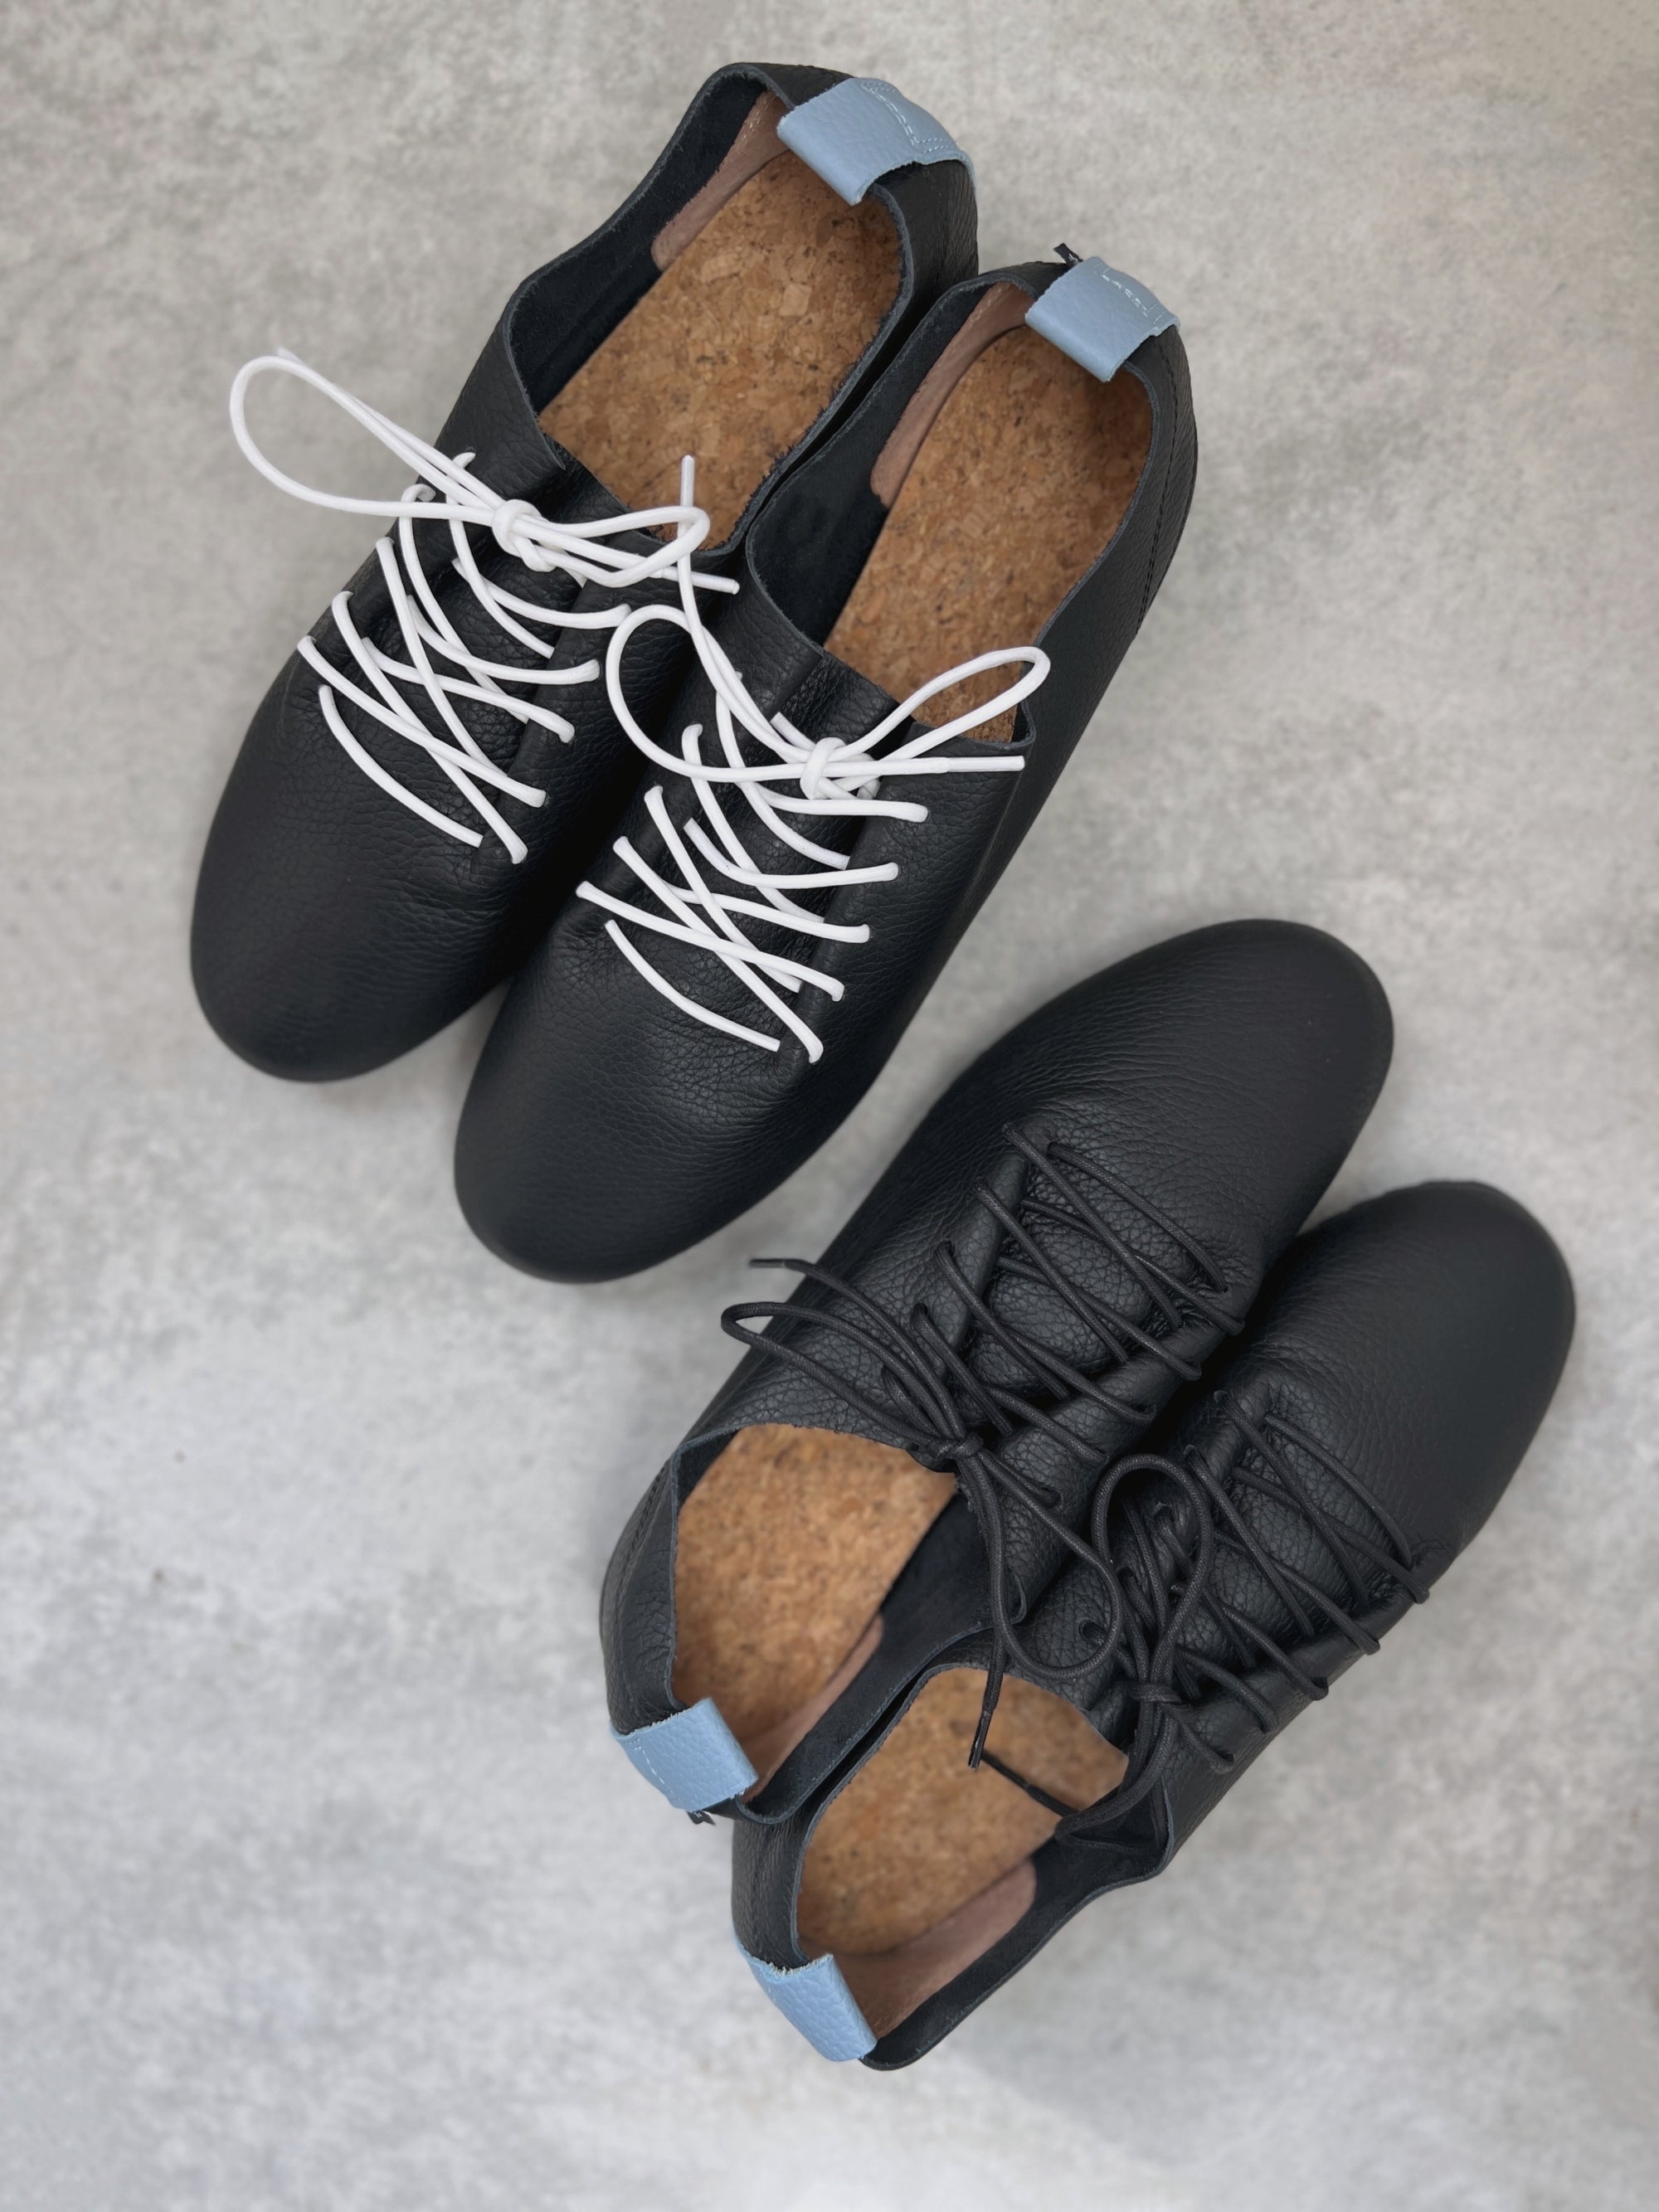 Japanese leather shoes, made by swaanarlberg japan for the maker hobart